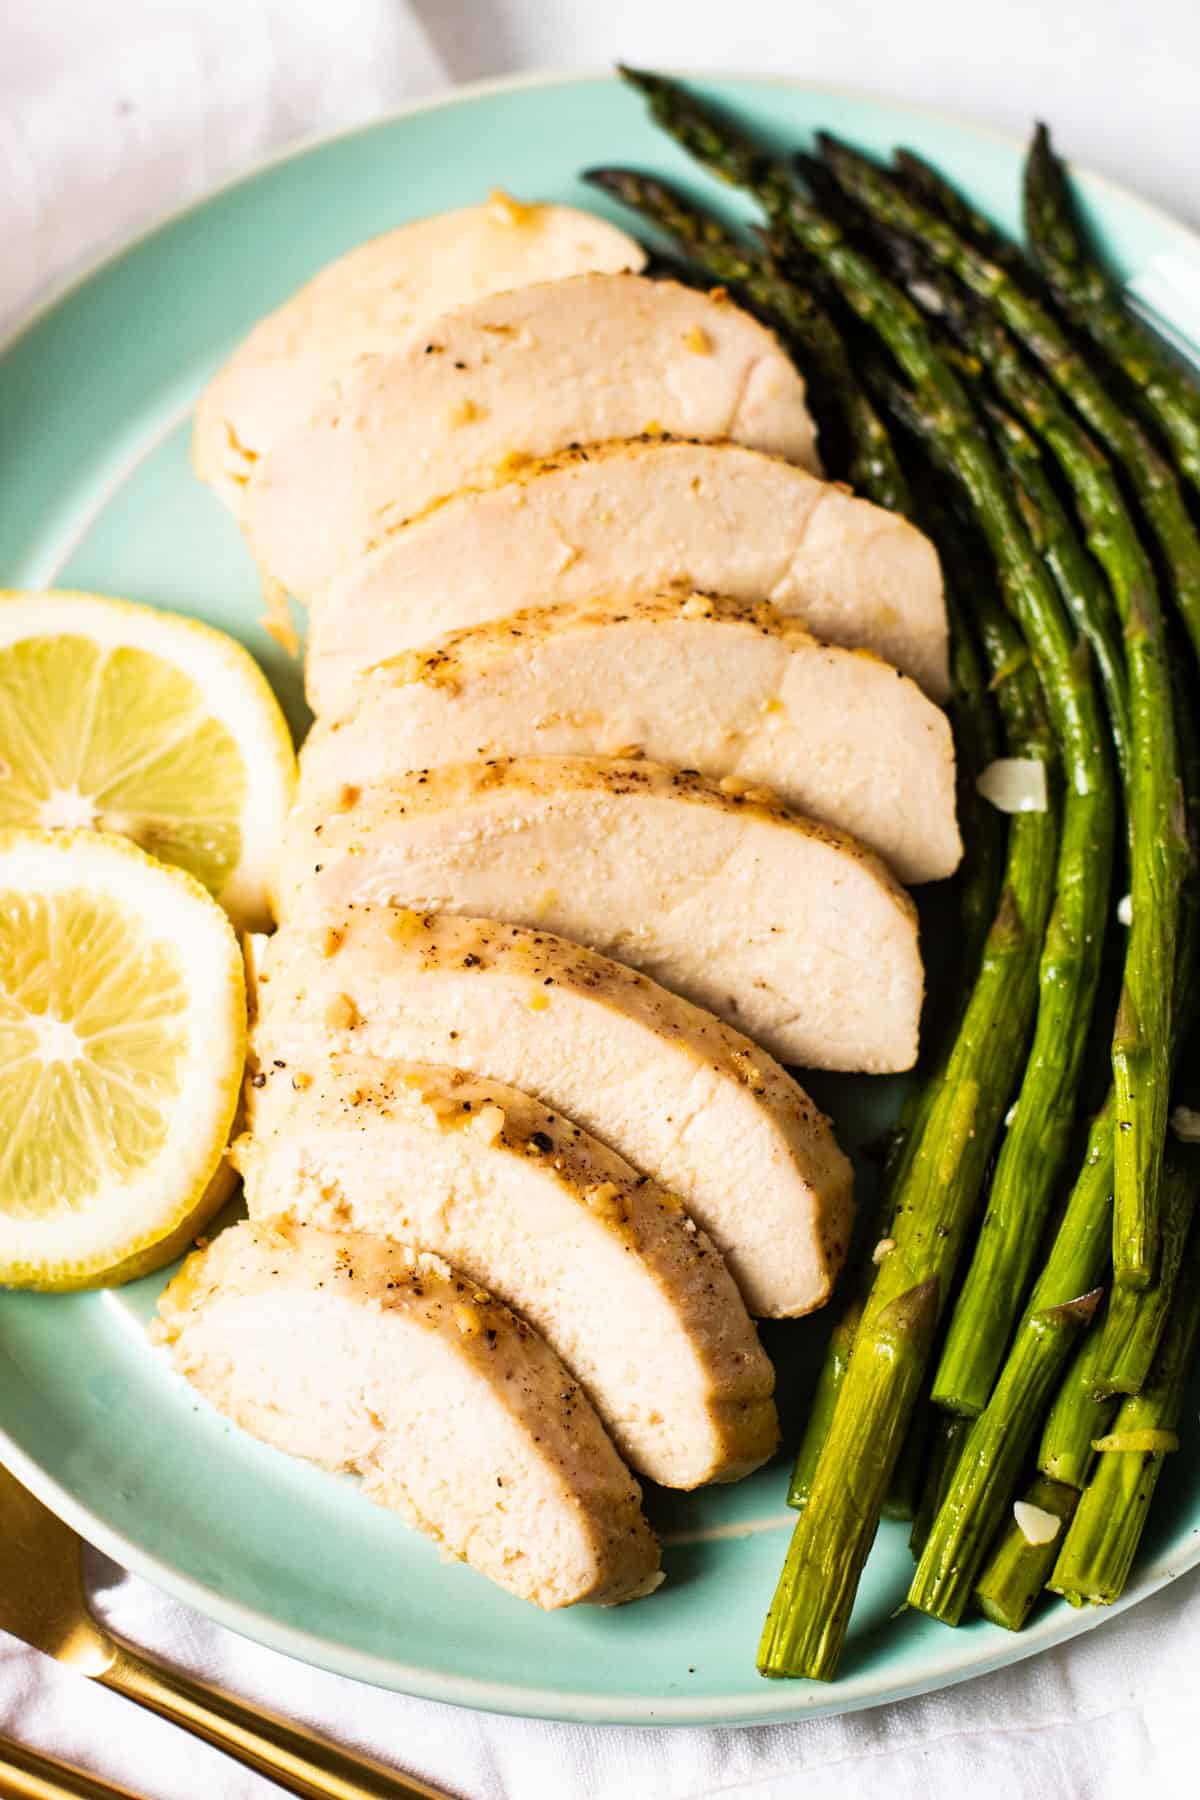 Lemon pepper baked chicken on a plate with asparagus.